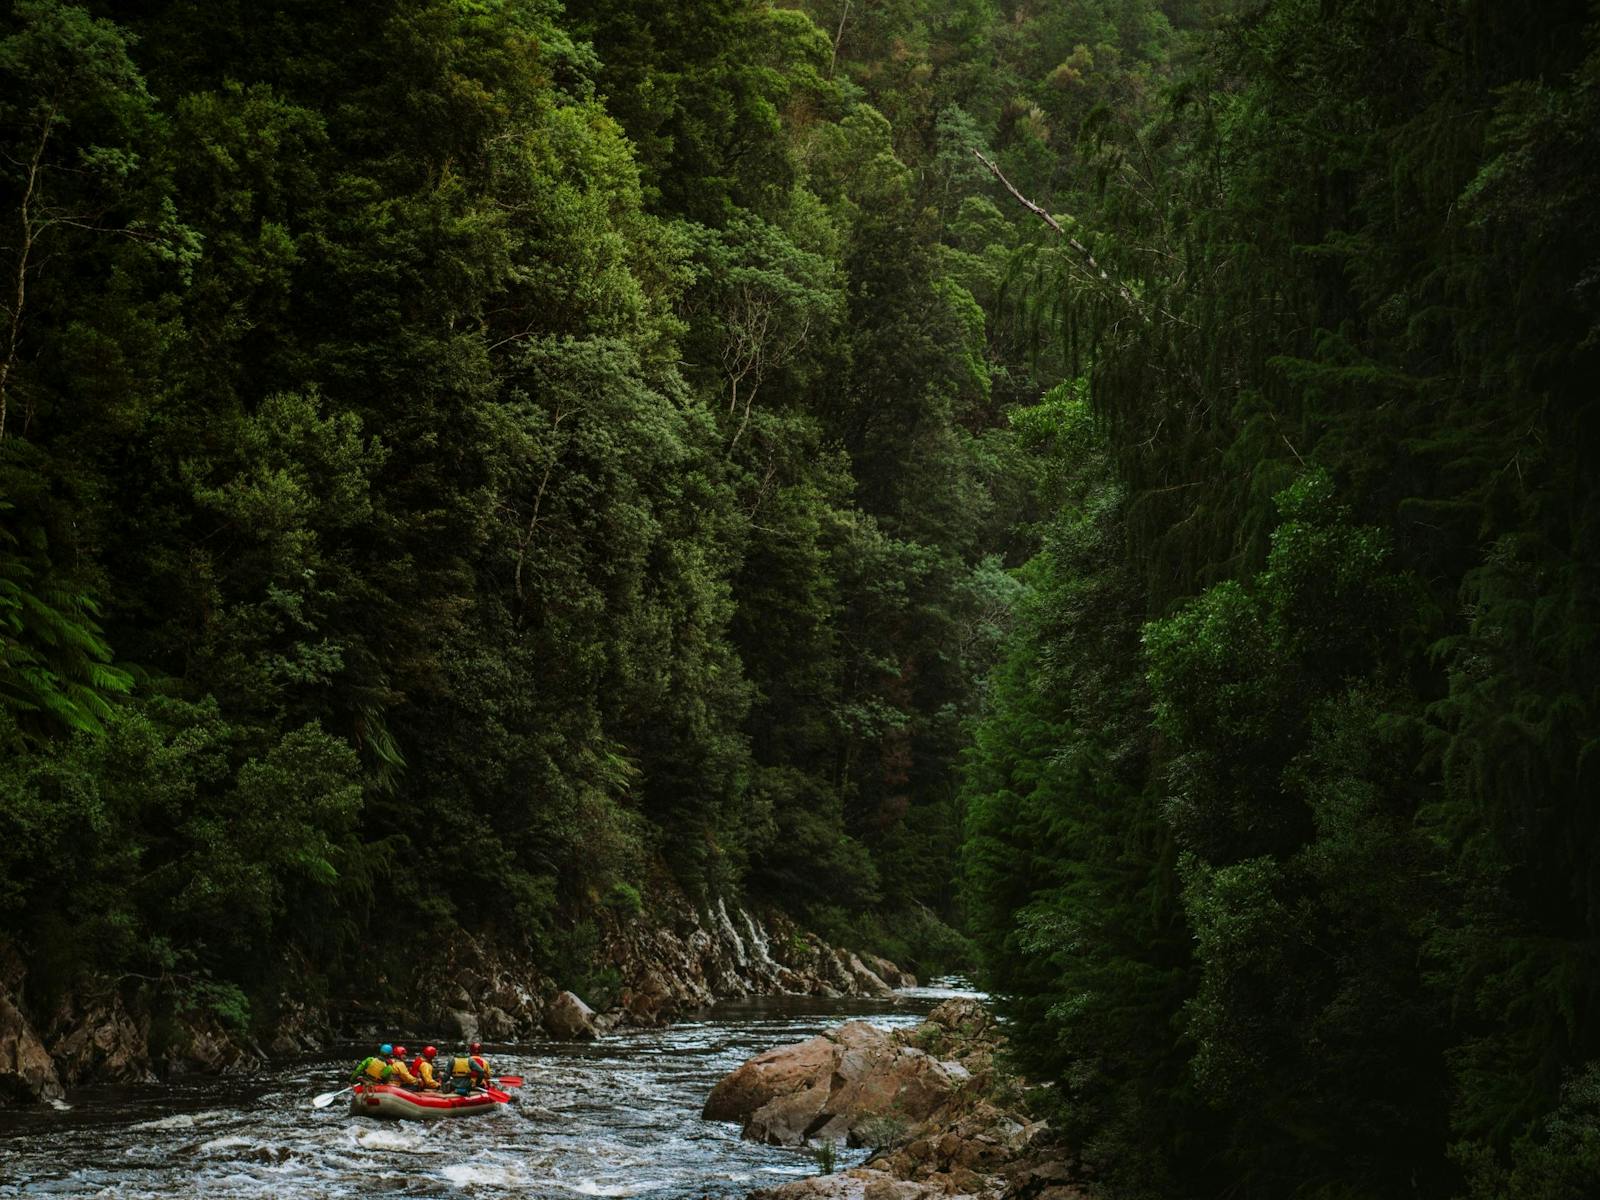 Raft with people on the King River, Tasmania